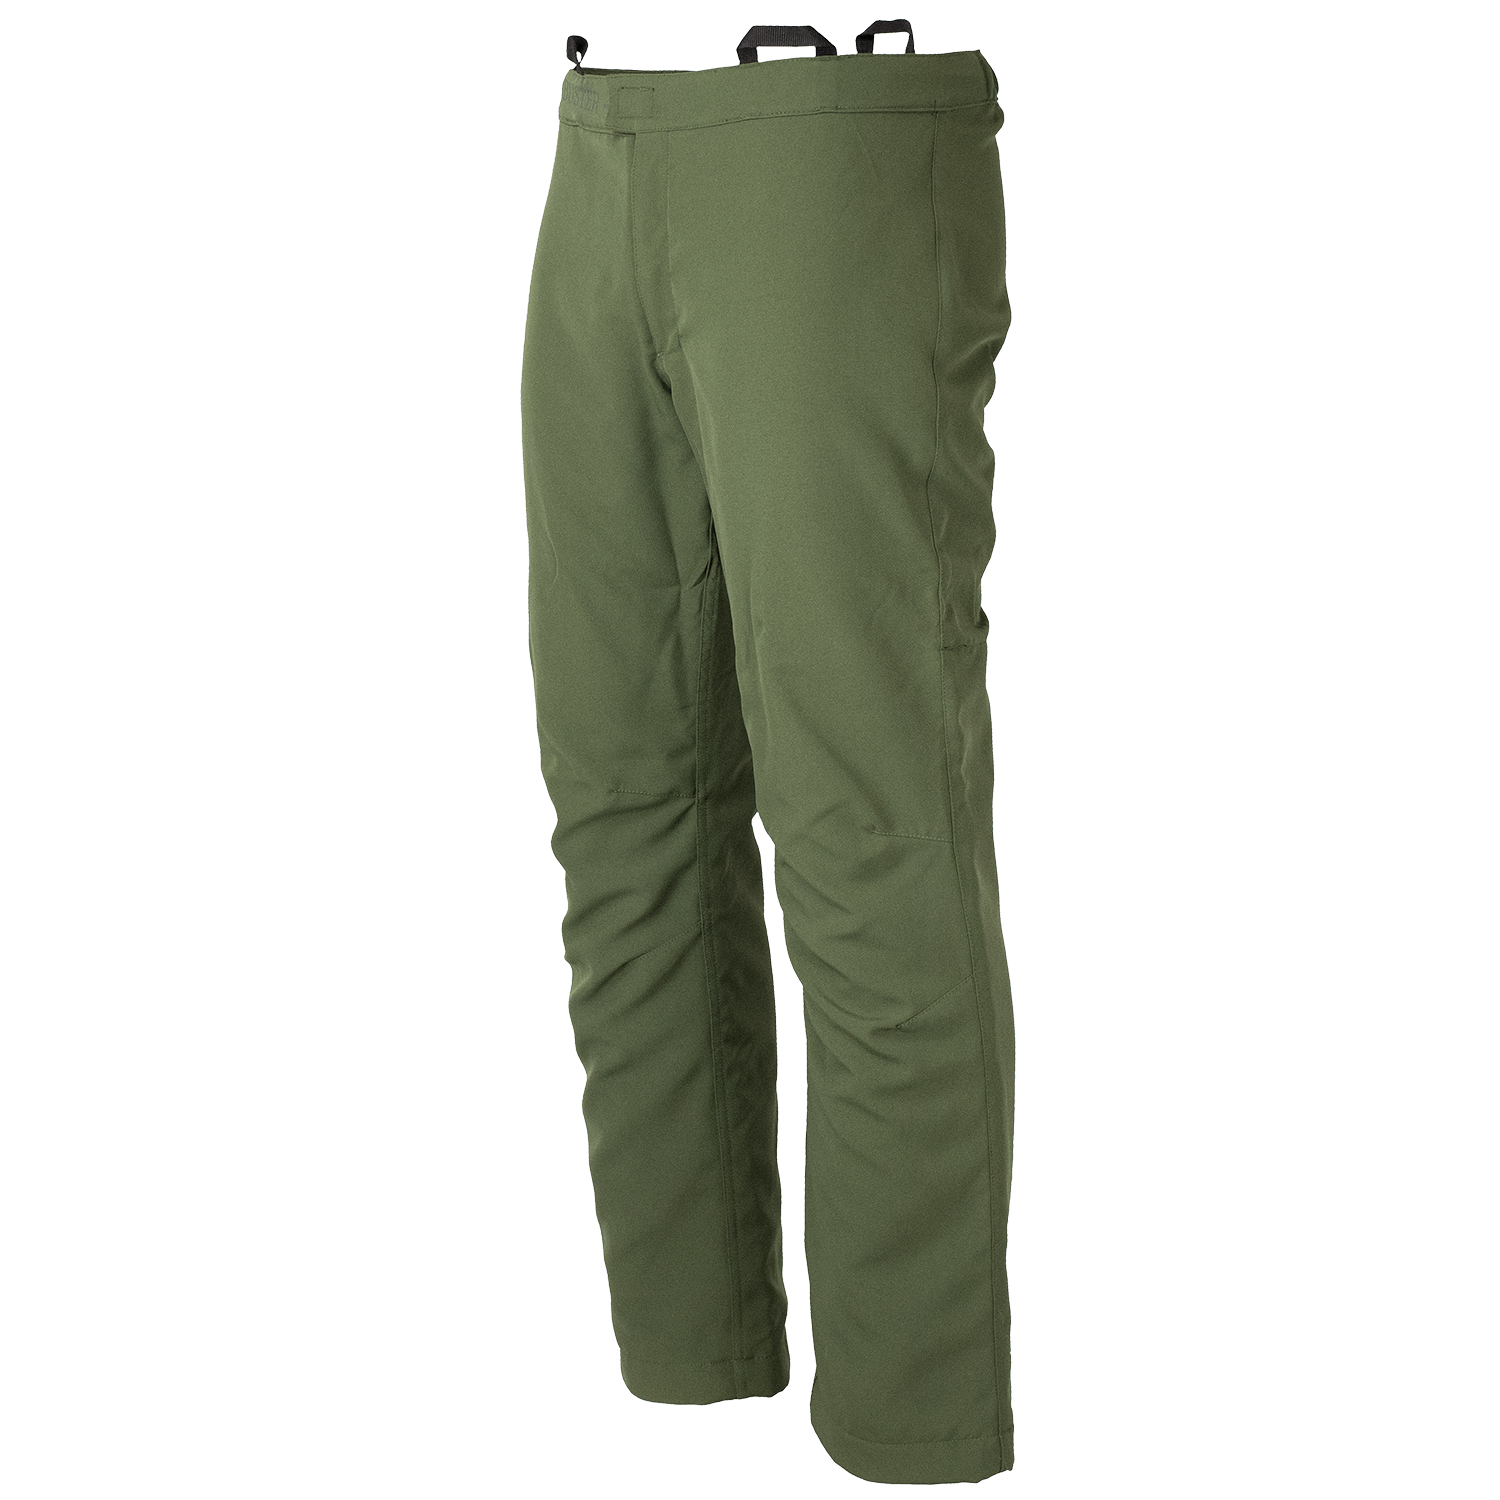 Pirscher Gear Boarbuster Protective Underpants - Men's Hunting Clothing